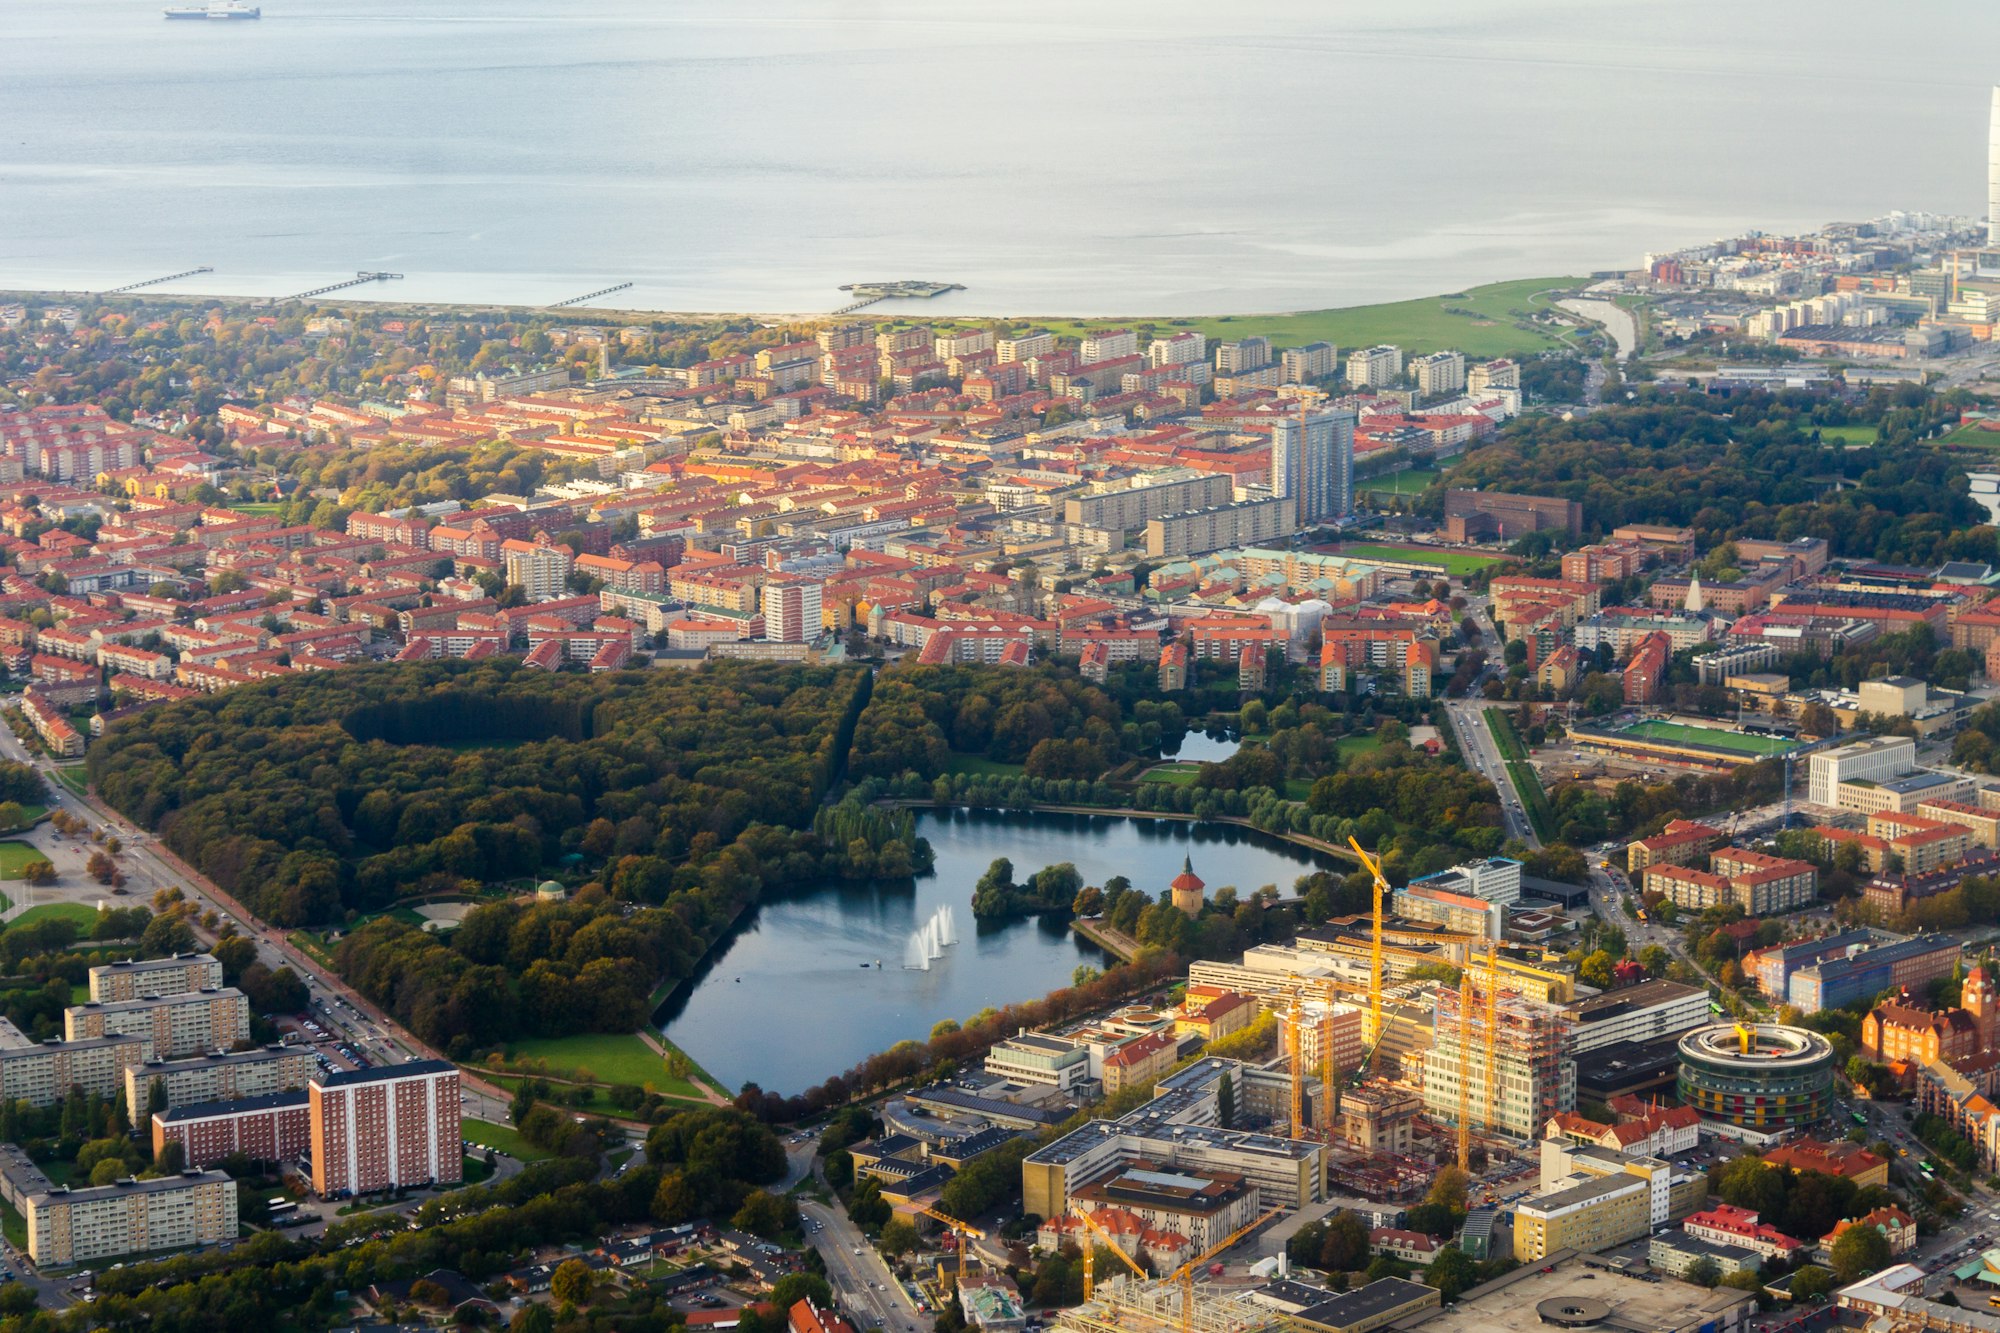 Aerial view of Malmo city Sweden